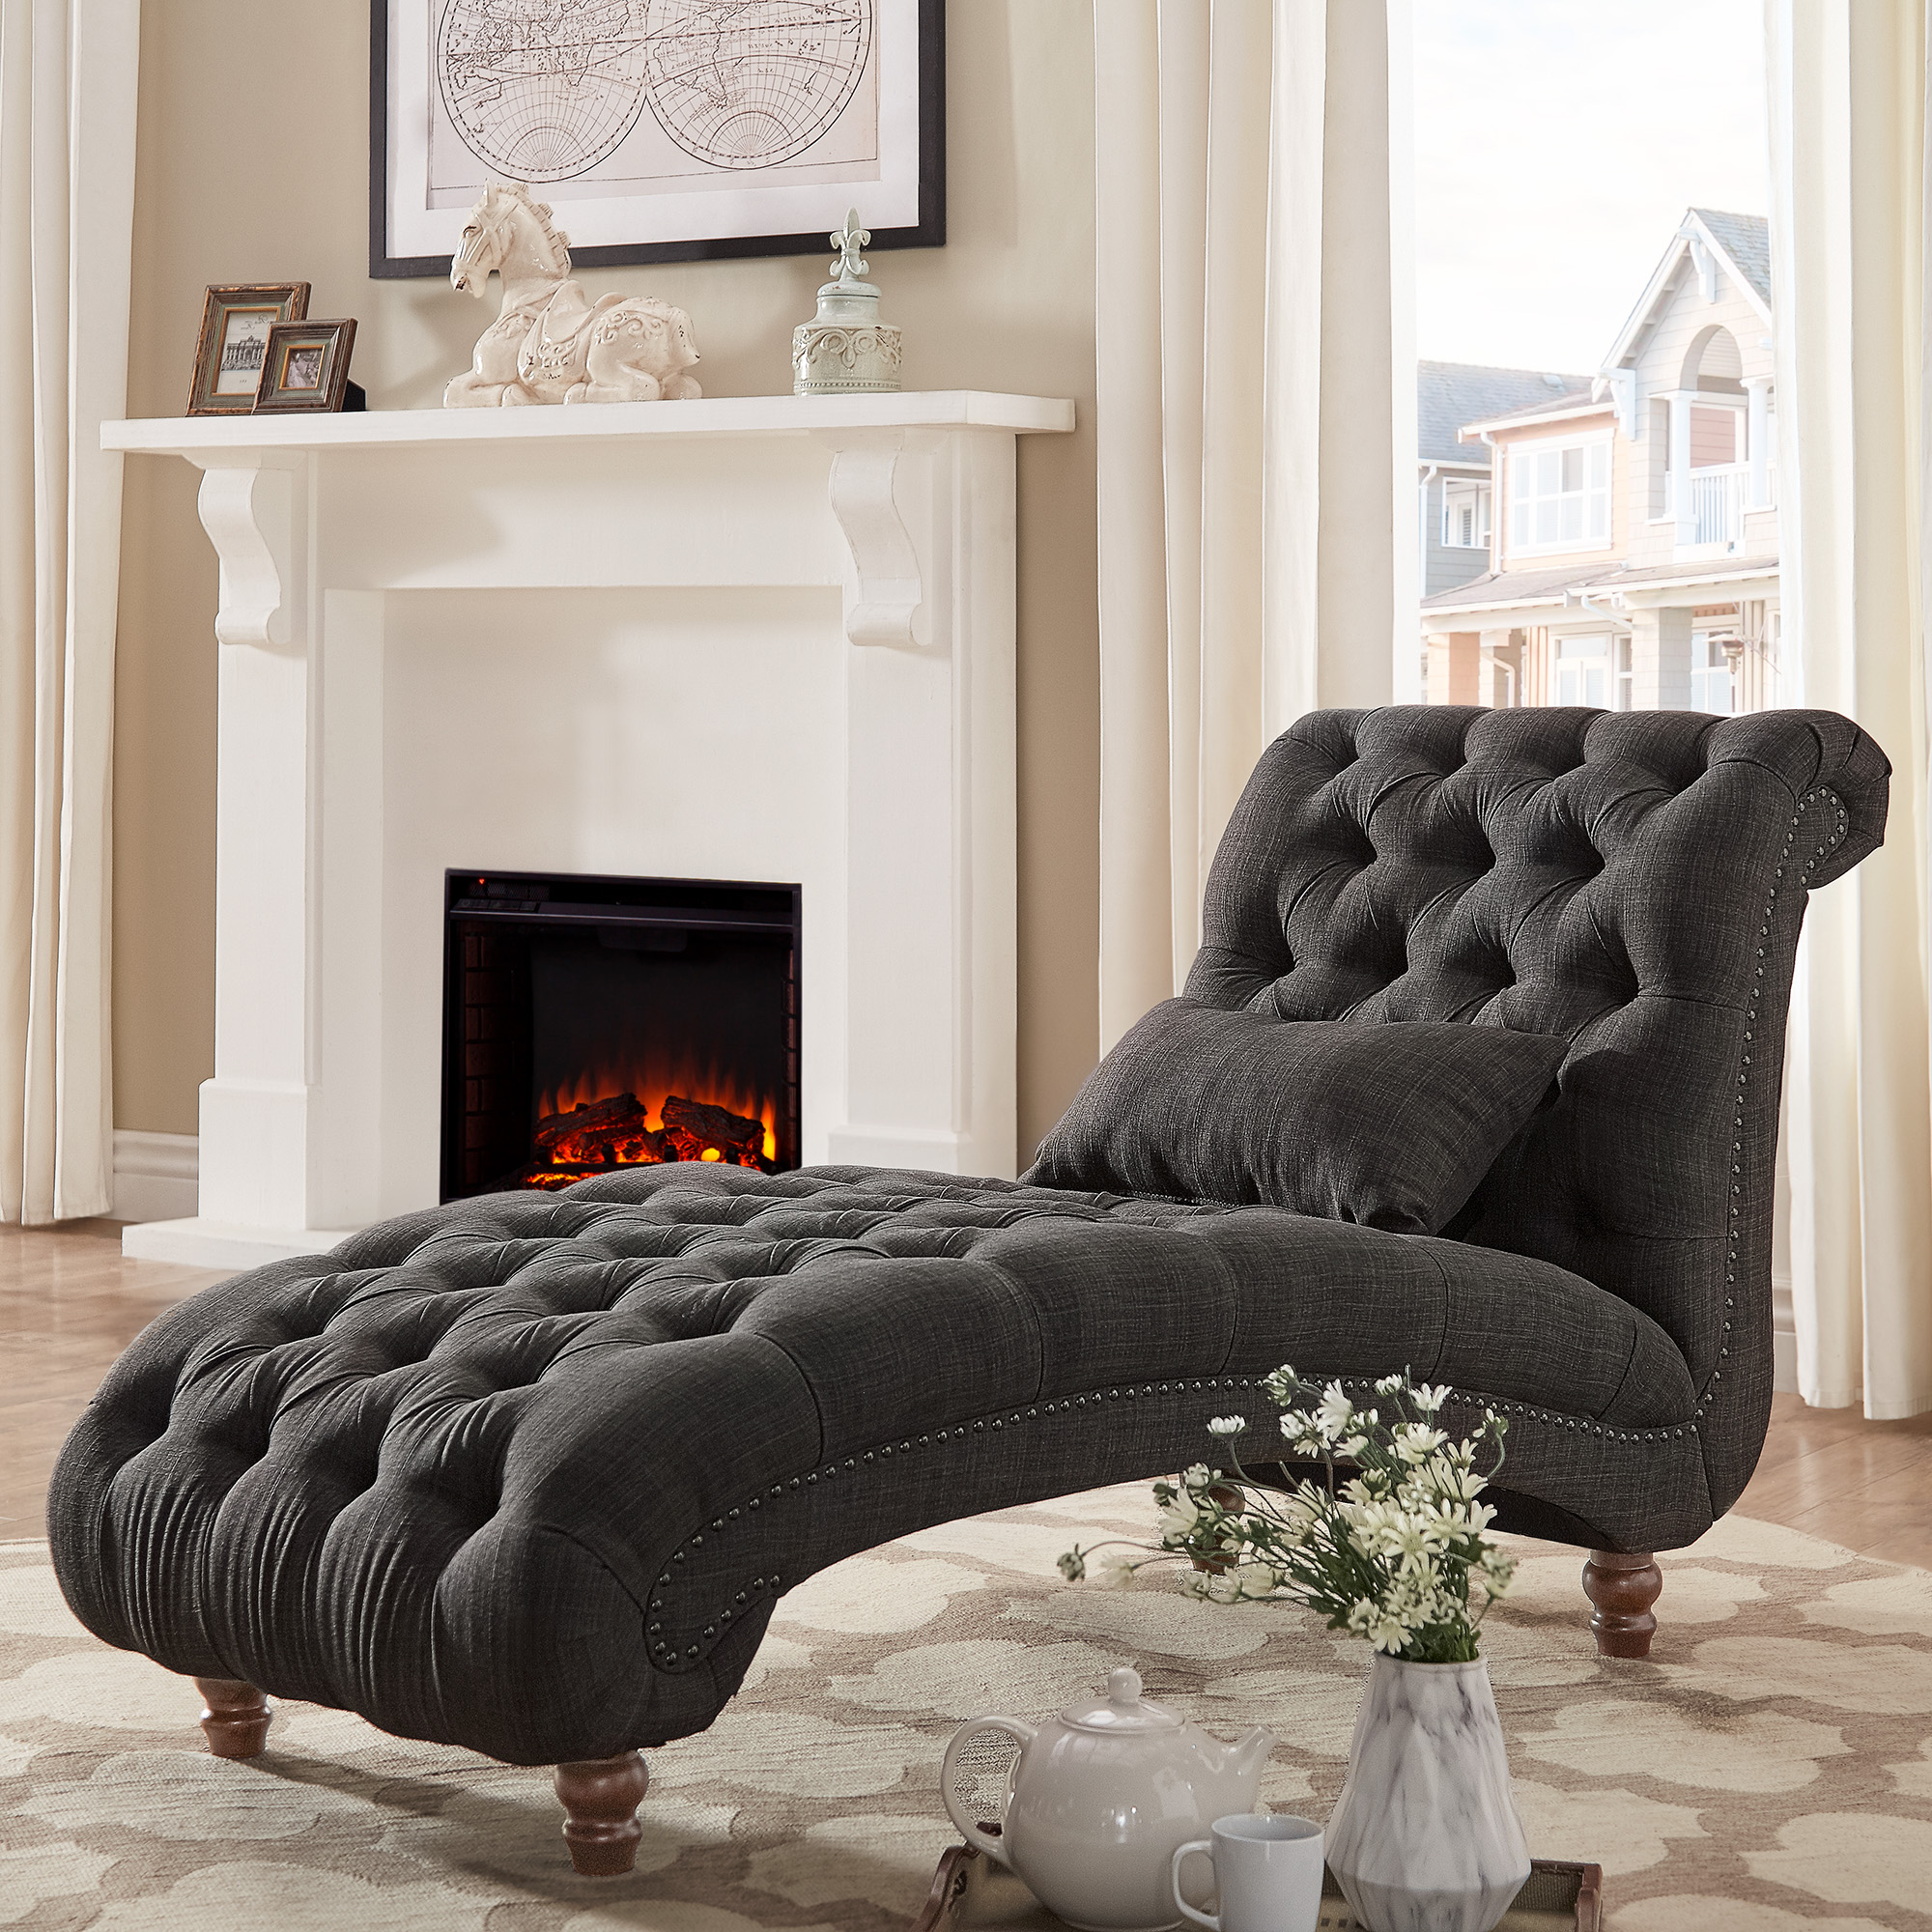 Weston Home Bowman Long Tufted Lounge Chair With Matching Pillow, Dark Gray Linen - image 1 of 6